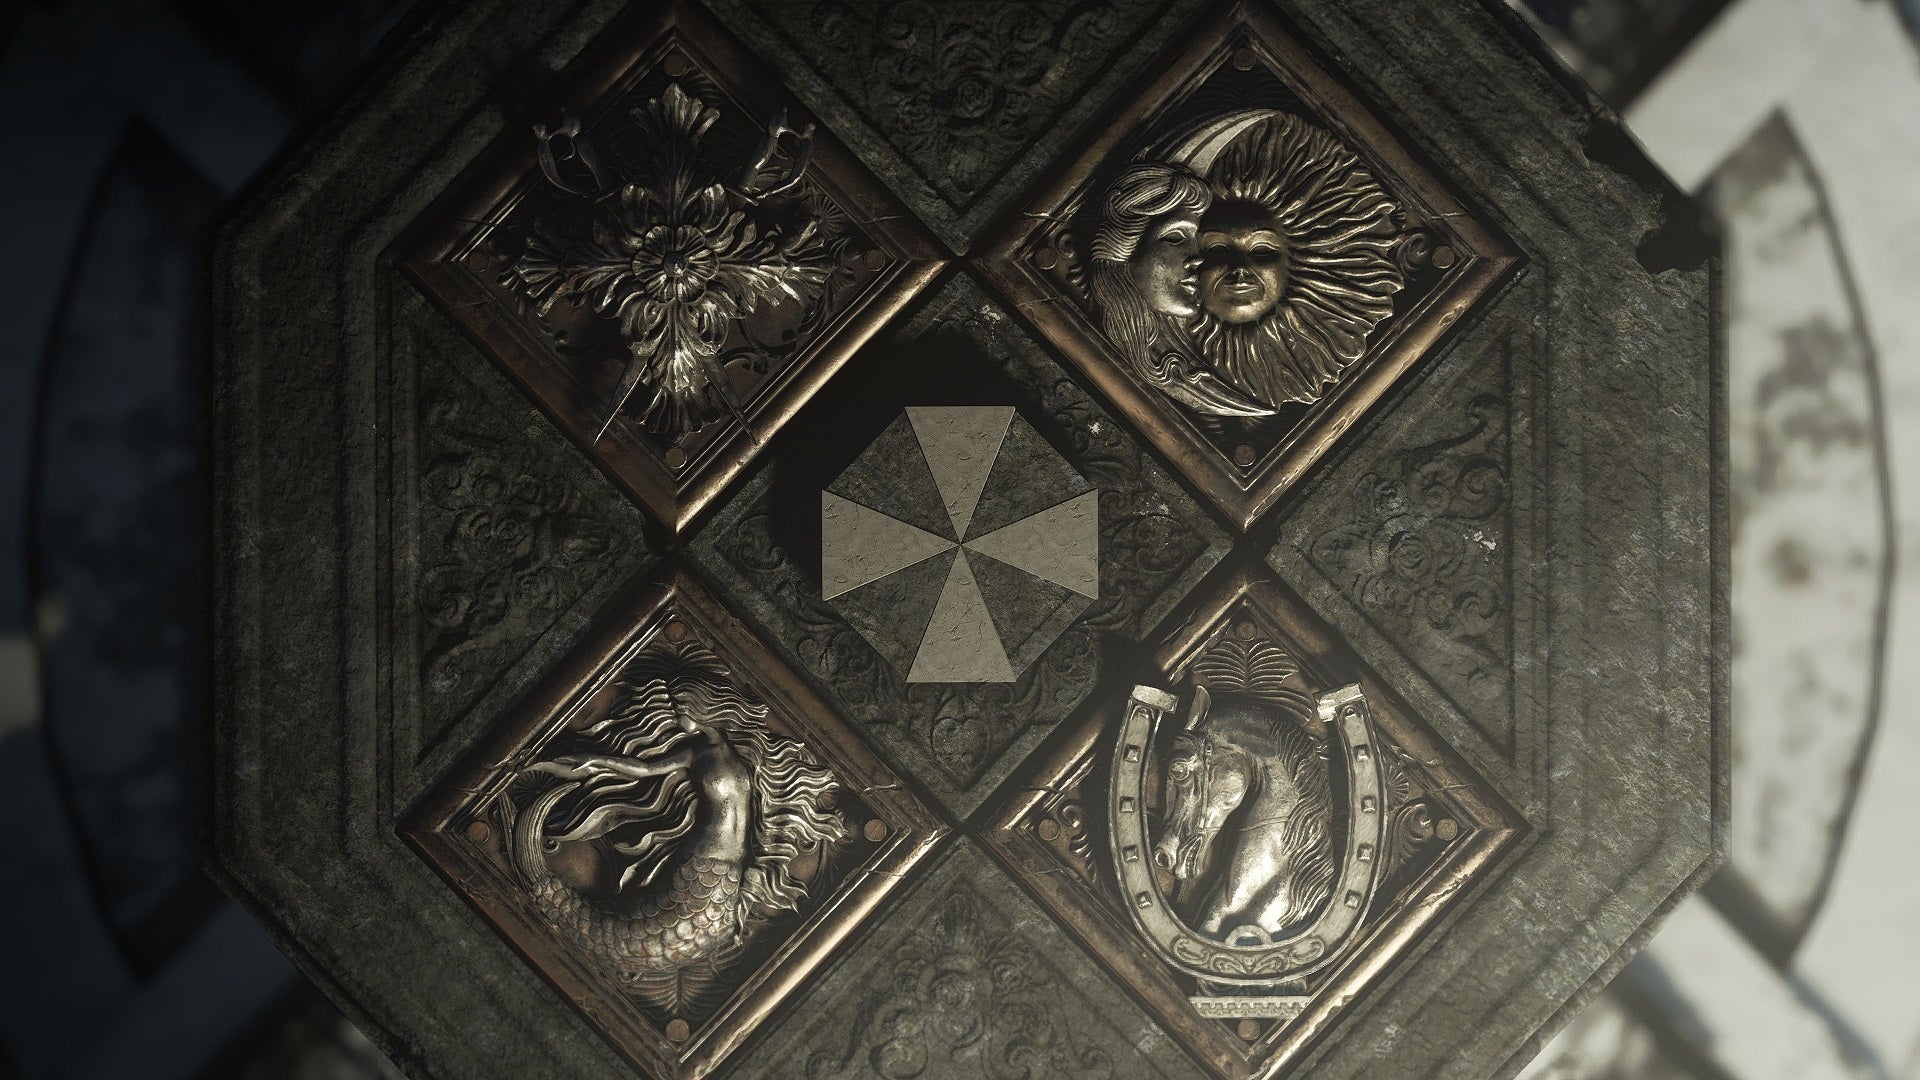 The seals of the Four Lords of the village and the Umbrella logo. (Image: Capcom)